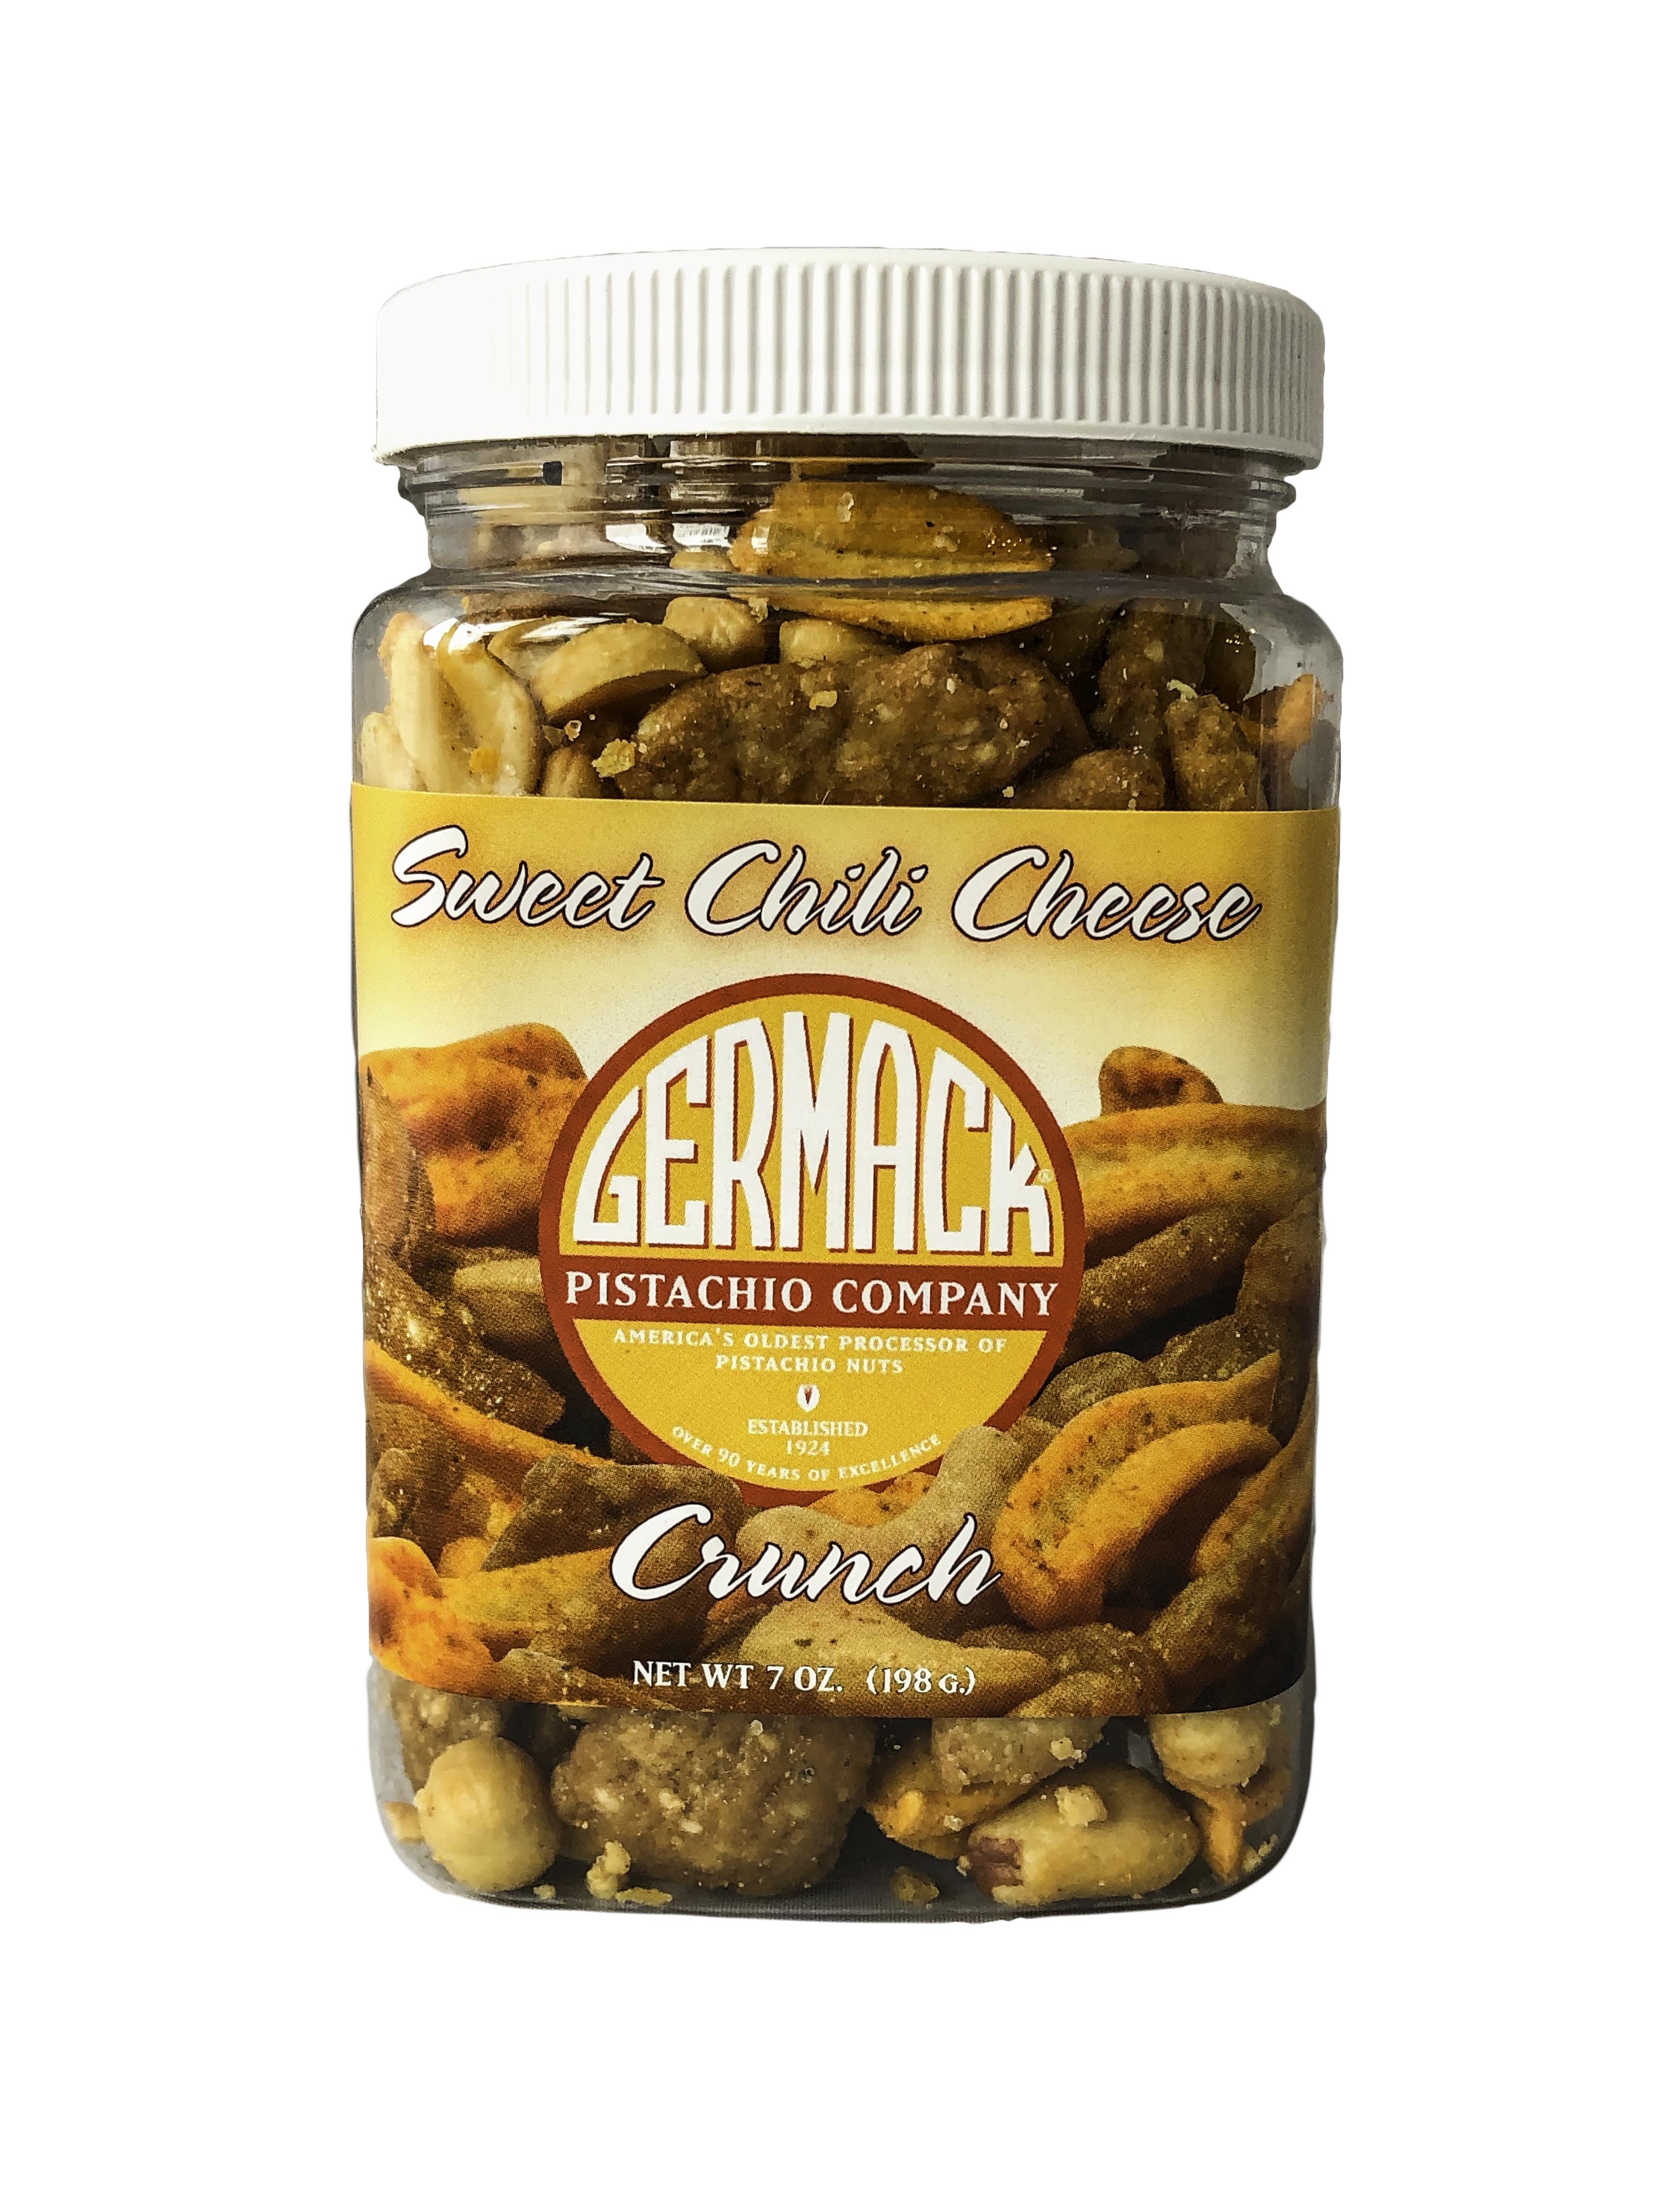 Picture Sweet Chili Cheese Crunch - 7oz Jar